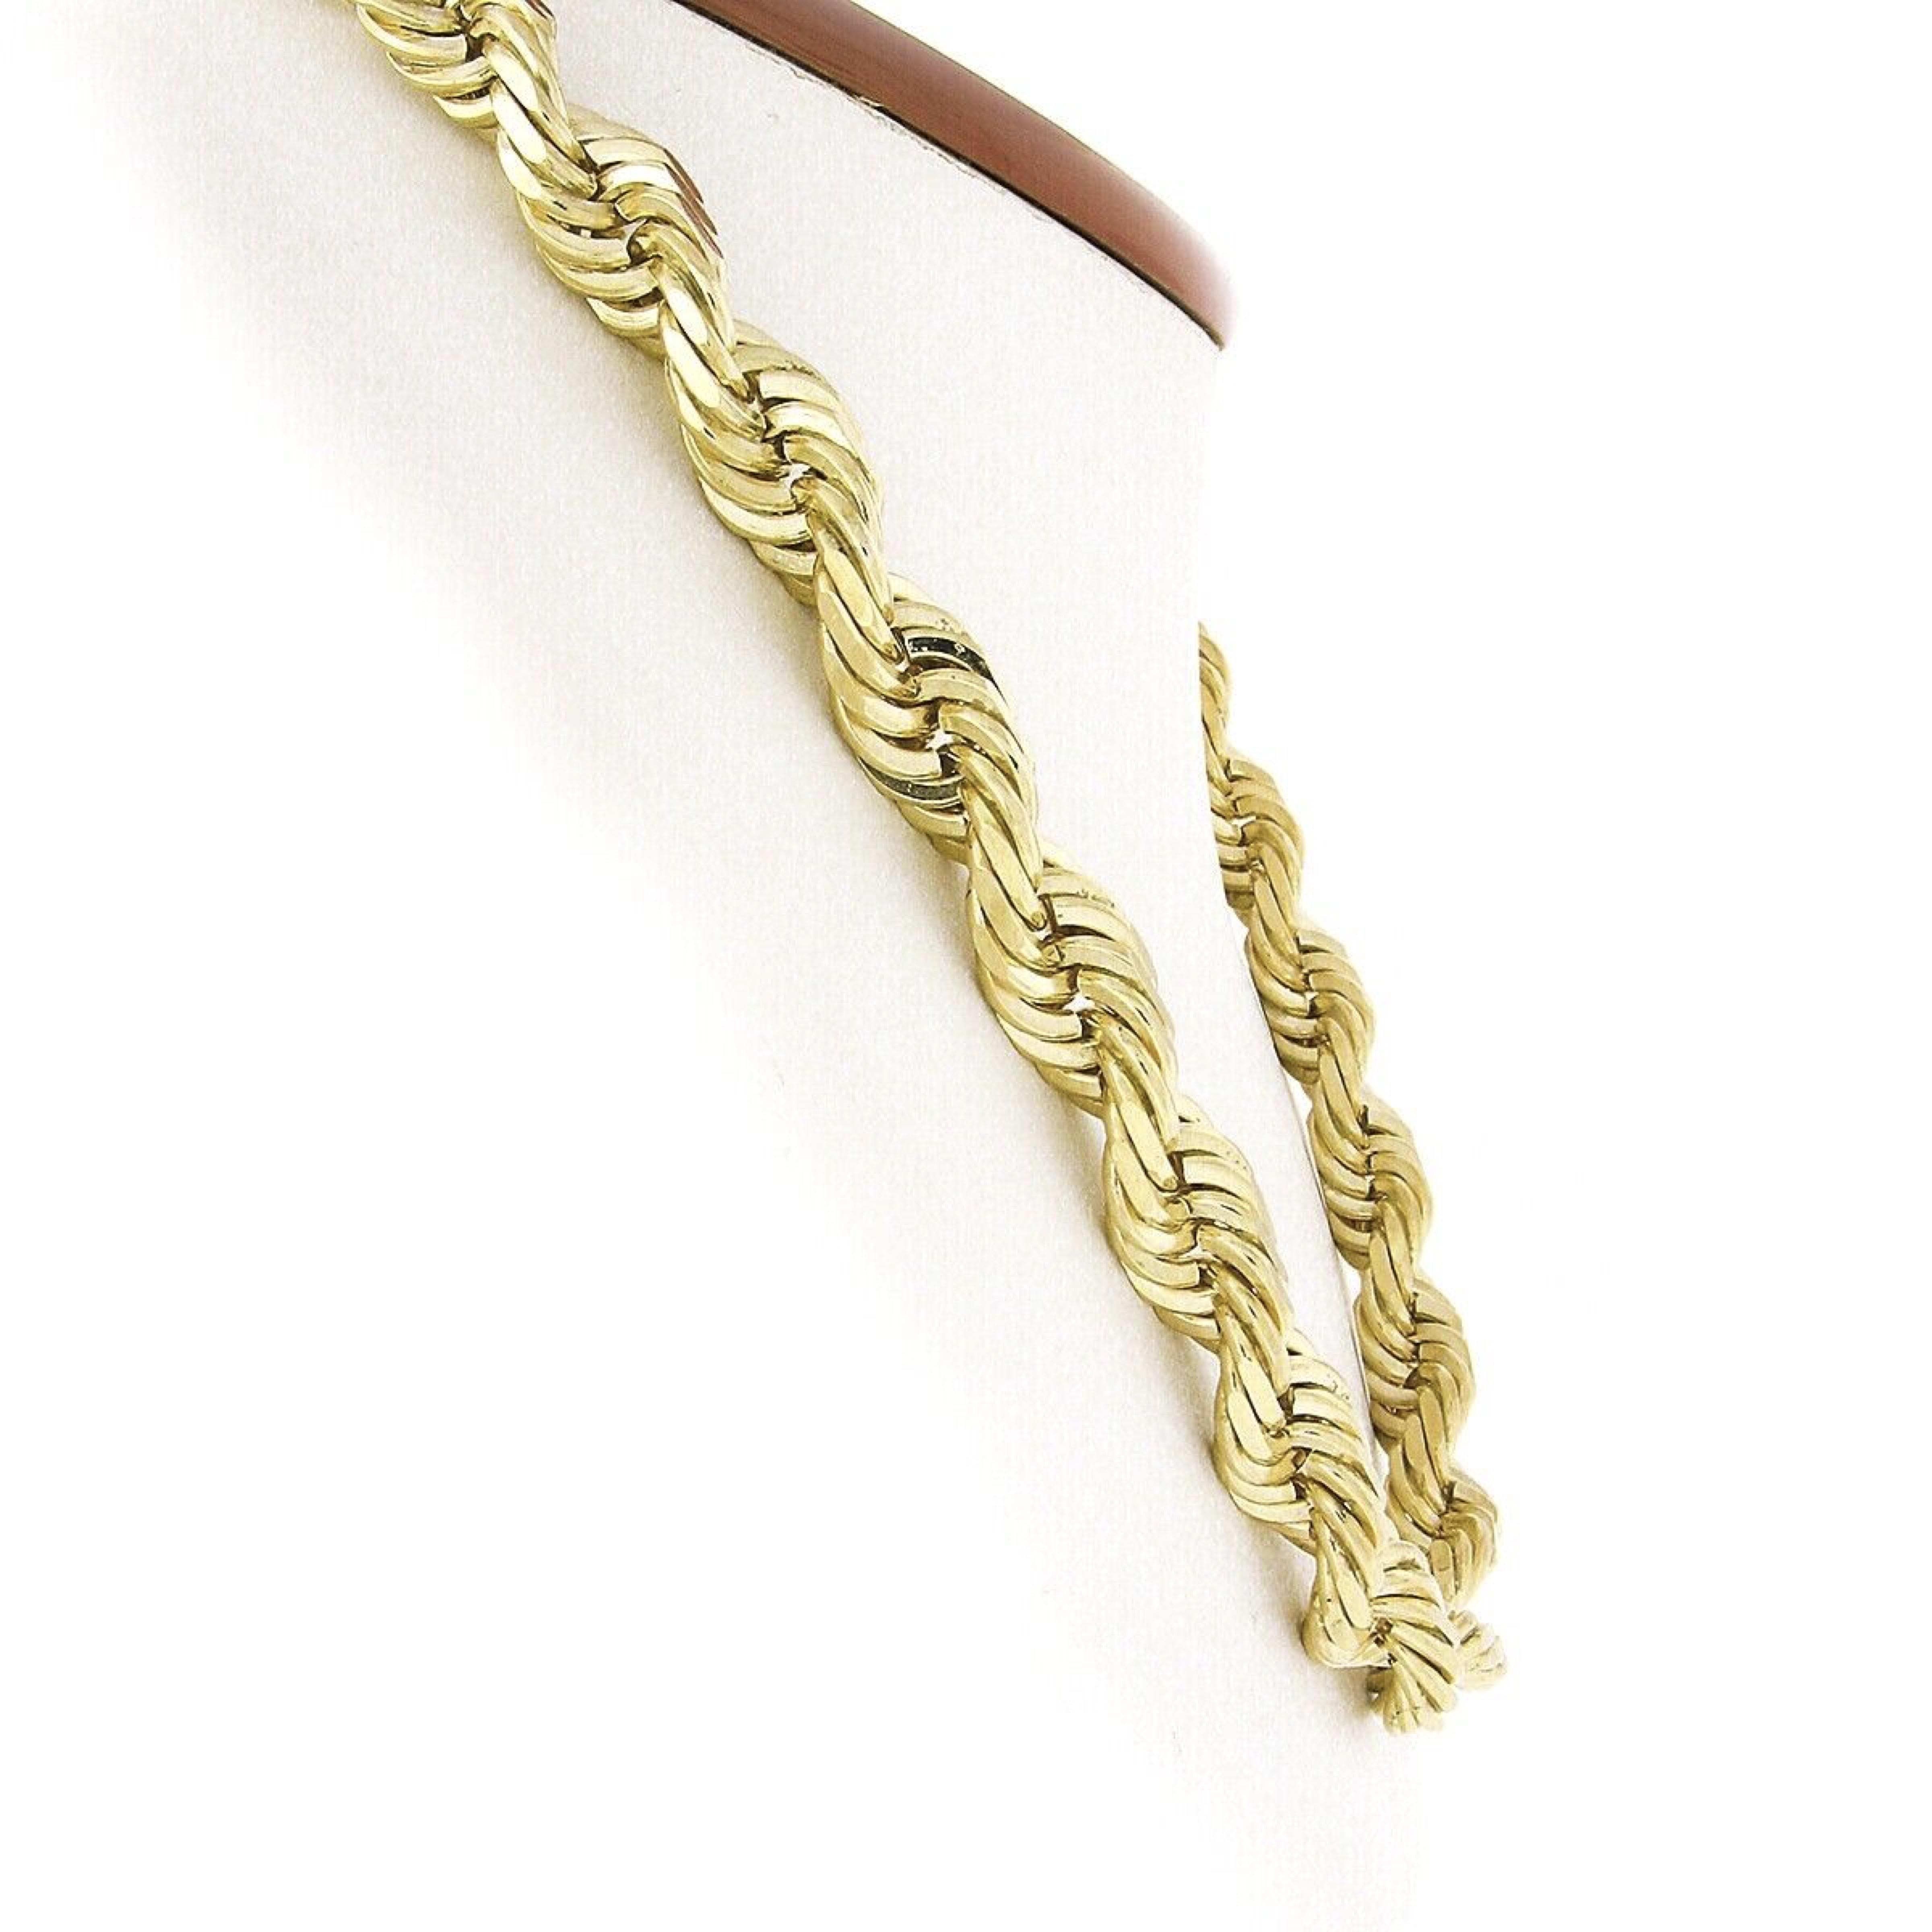 This magnificent necklace was crafted from solid 14k yellow gold and features a very large and thick rope link chain with wonderful high polished finish throughout. This substantial and solidly made chain measures 22.5 inches in length and is